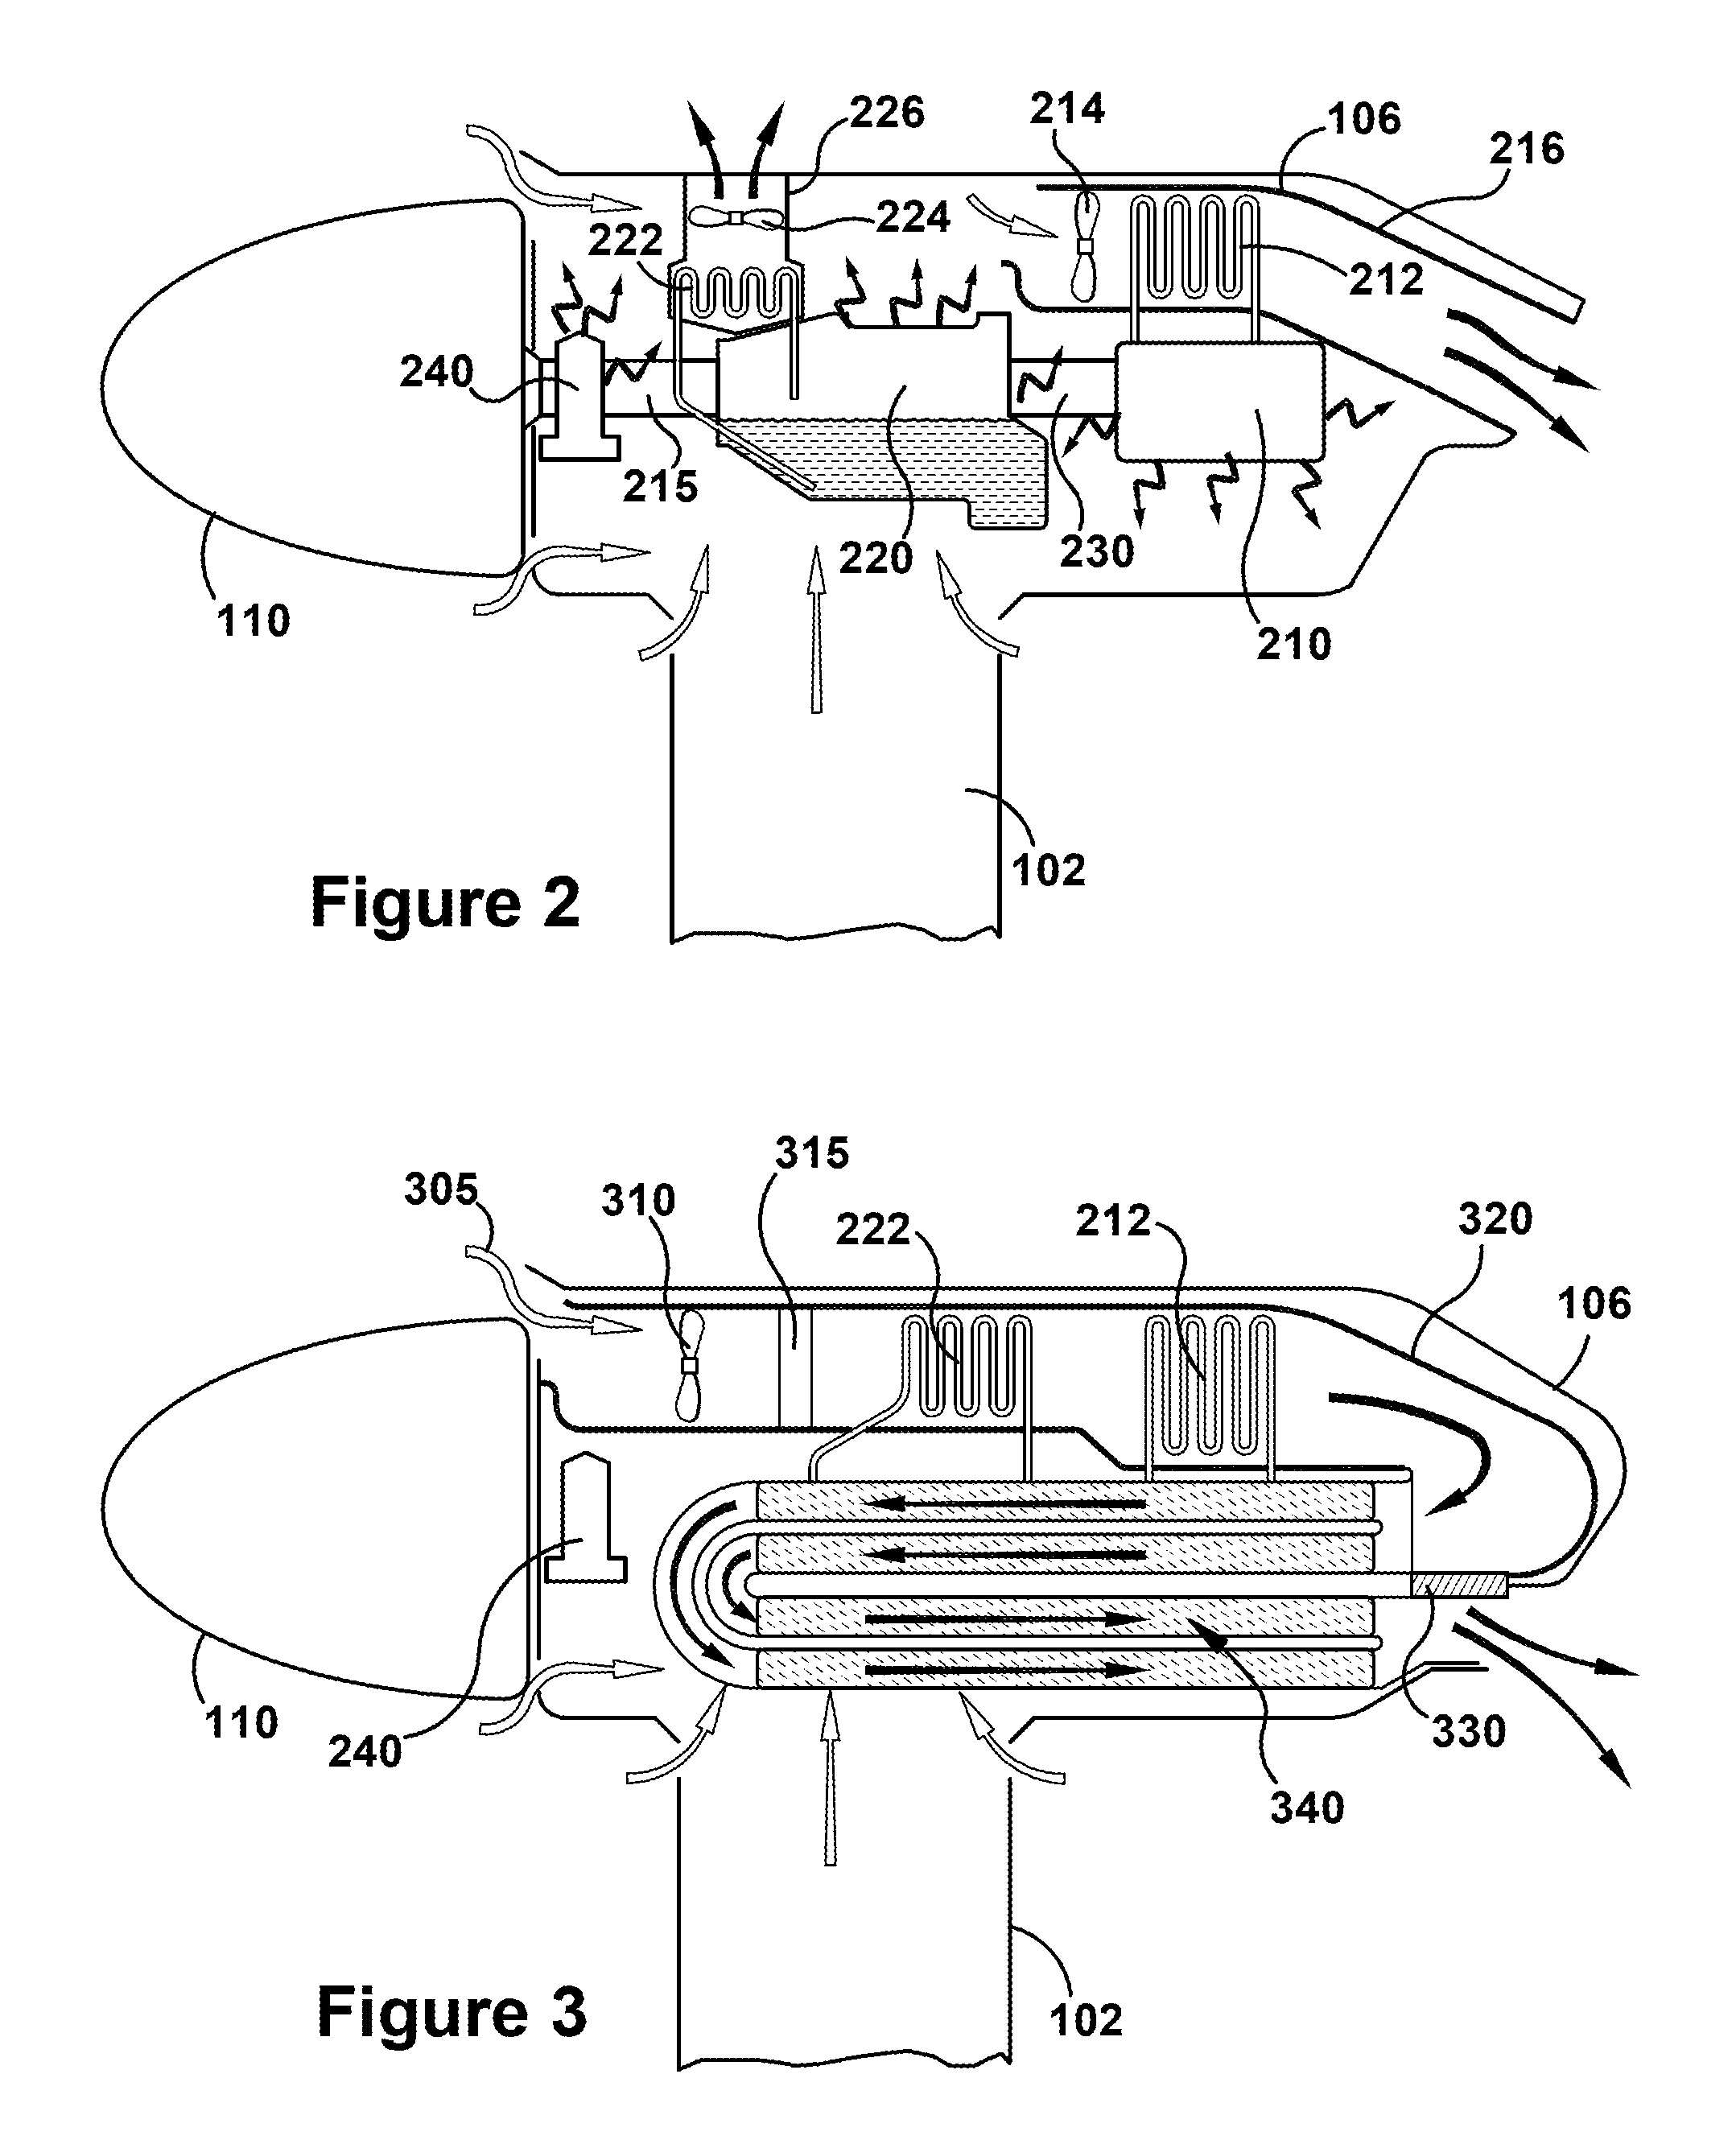 System for heating and cooling wind turbine components